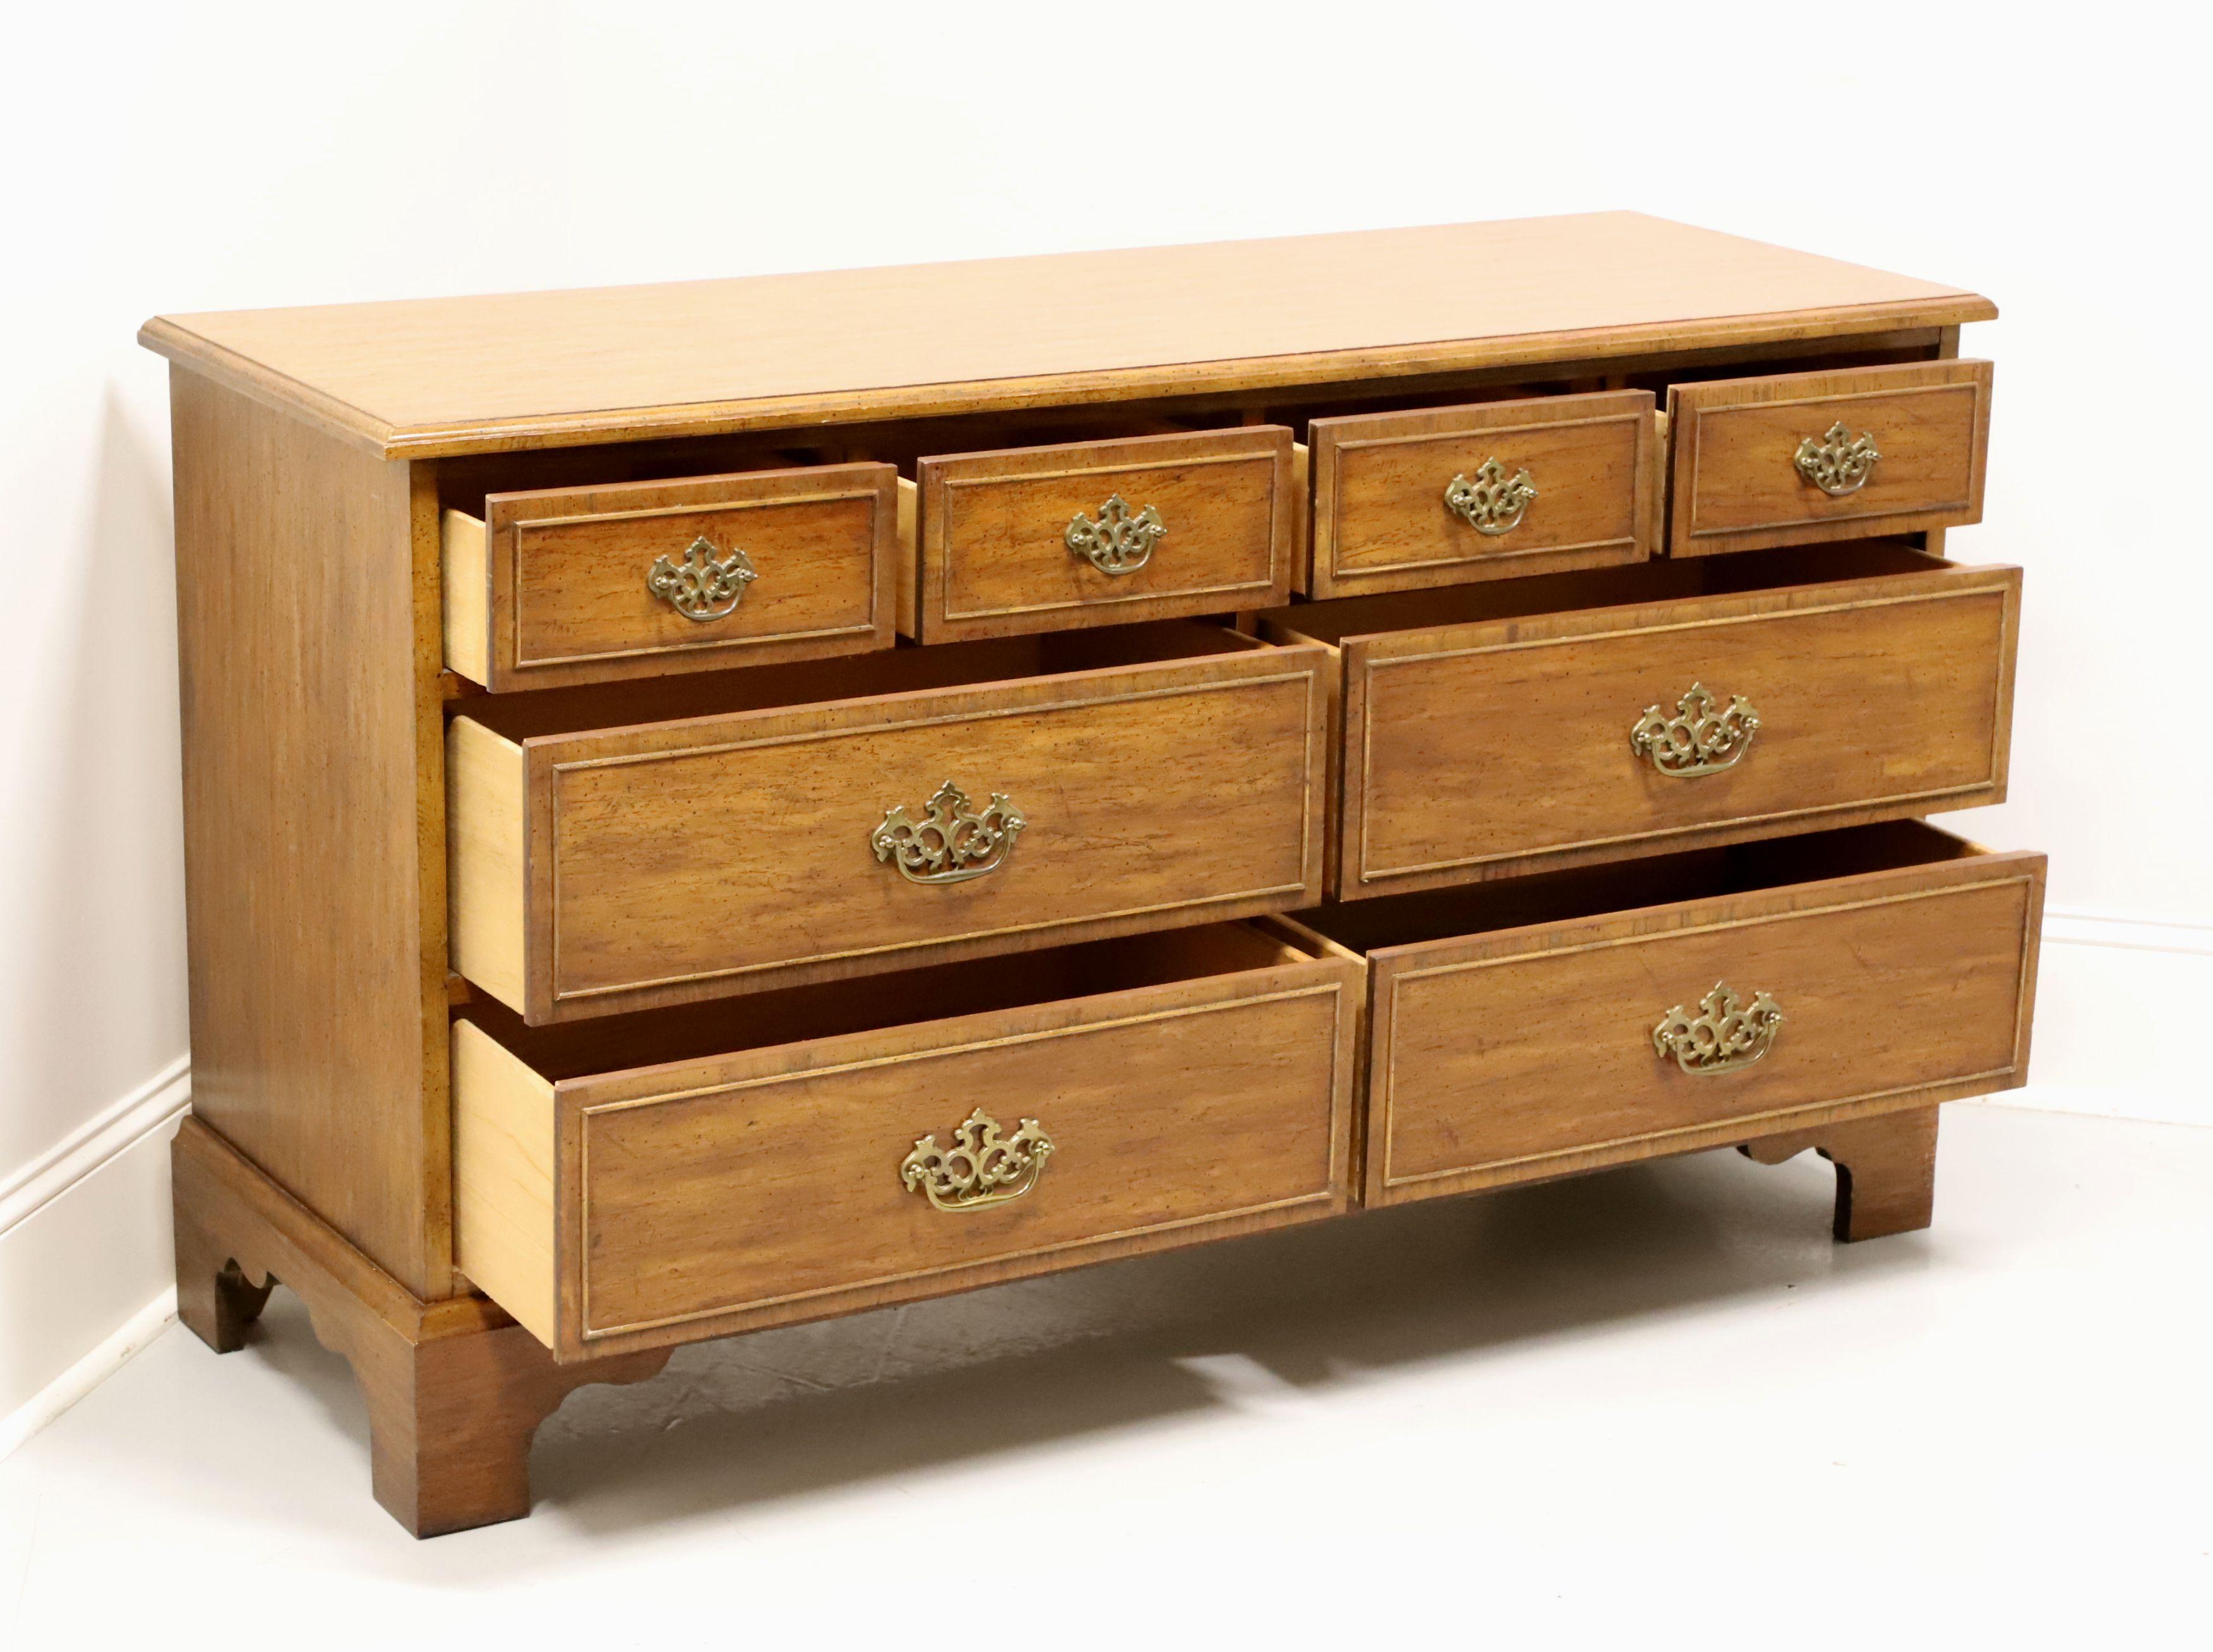 American DIXIE Sheffield Manor Pecan Chippendale Style Double Dresser For Sale